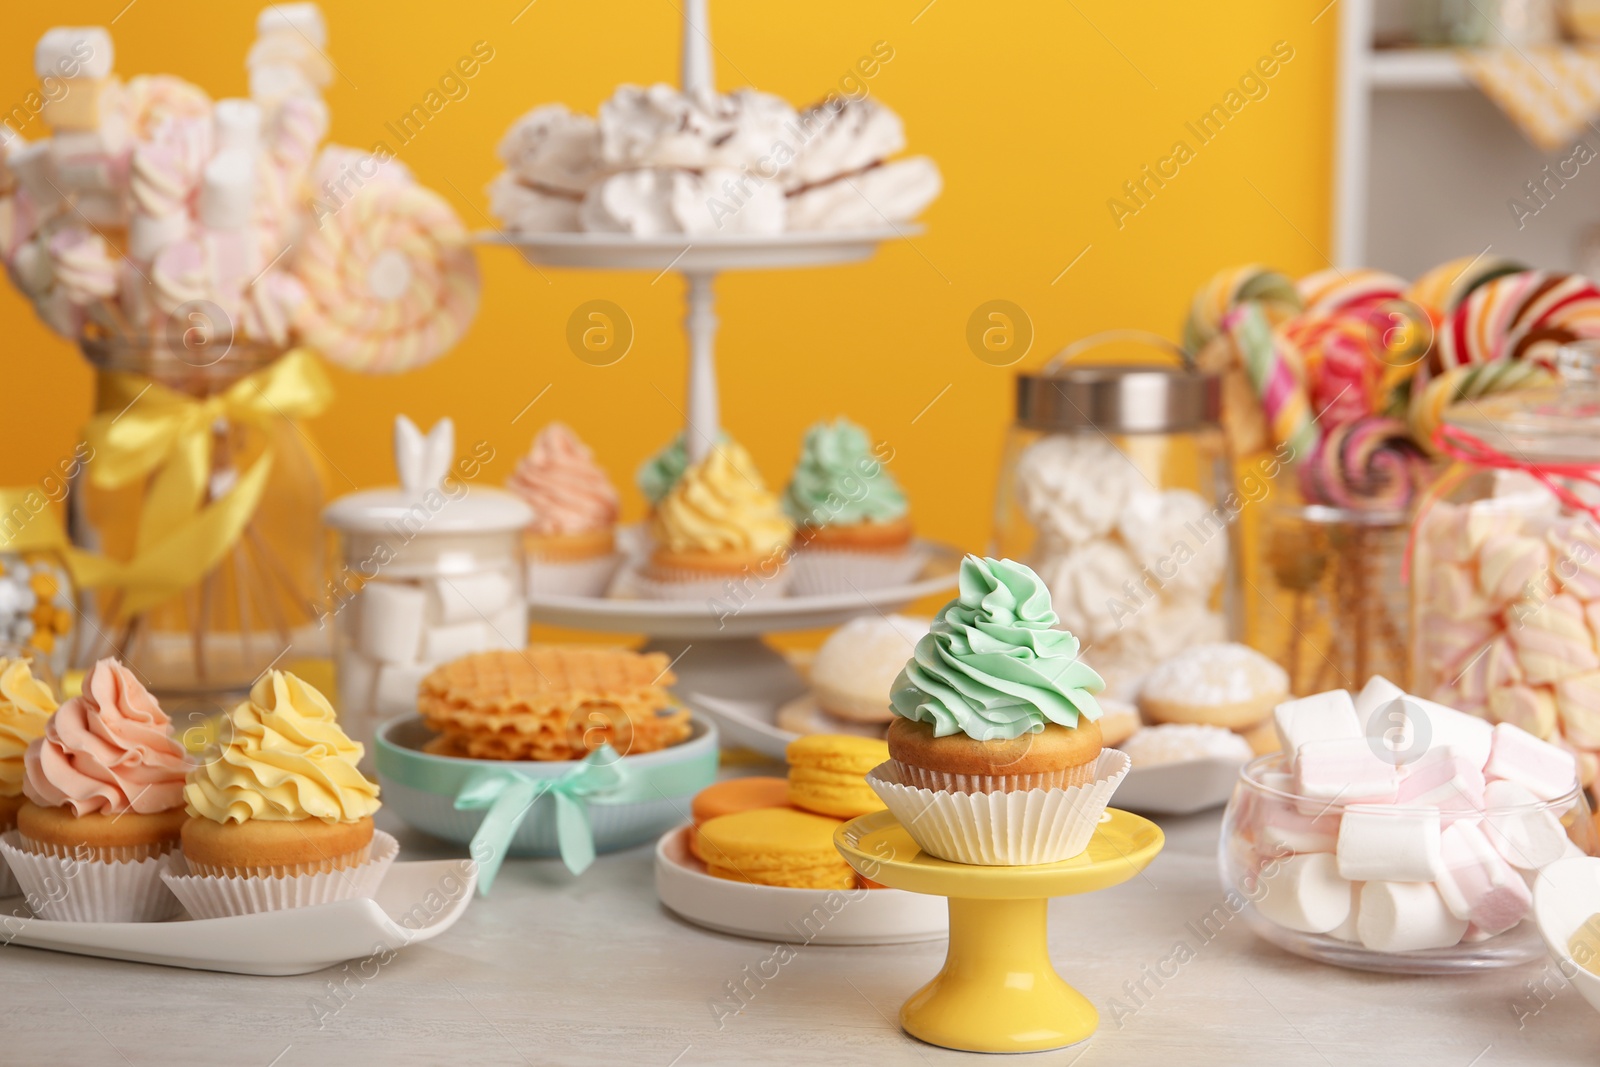 Photo of Tasty cupcakes and other sweets on table in room. Candy bar